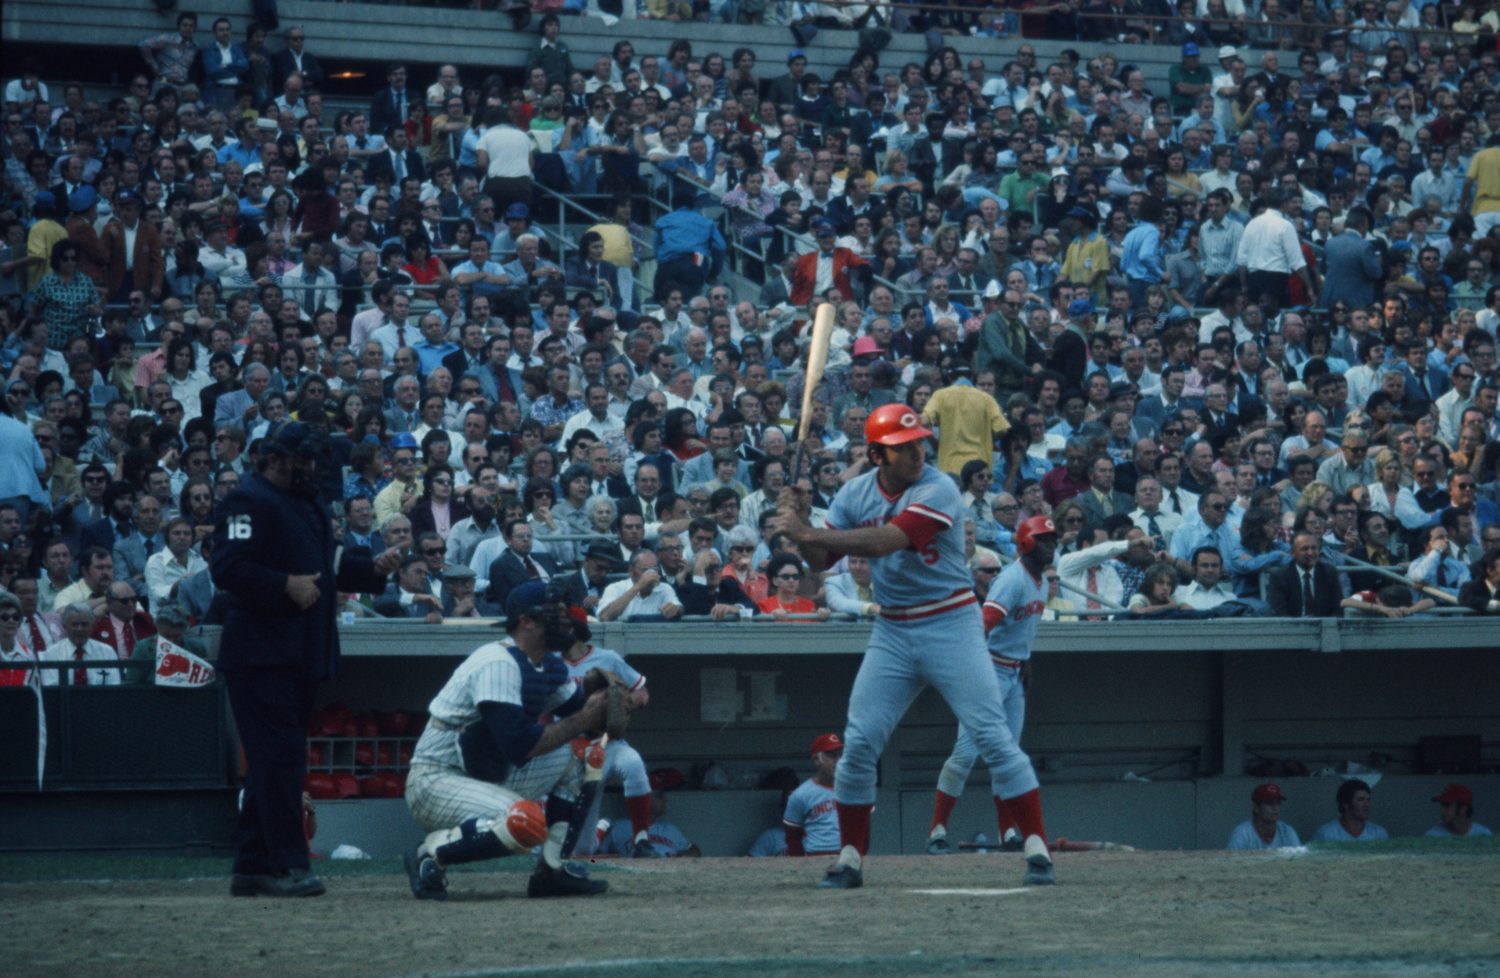 Bench in the Batter's Box in 1973 NLCS